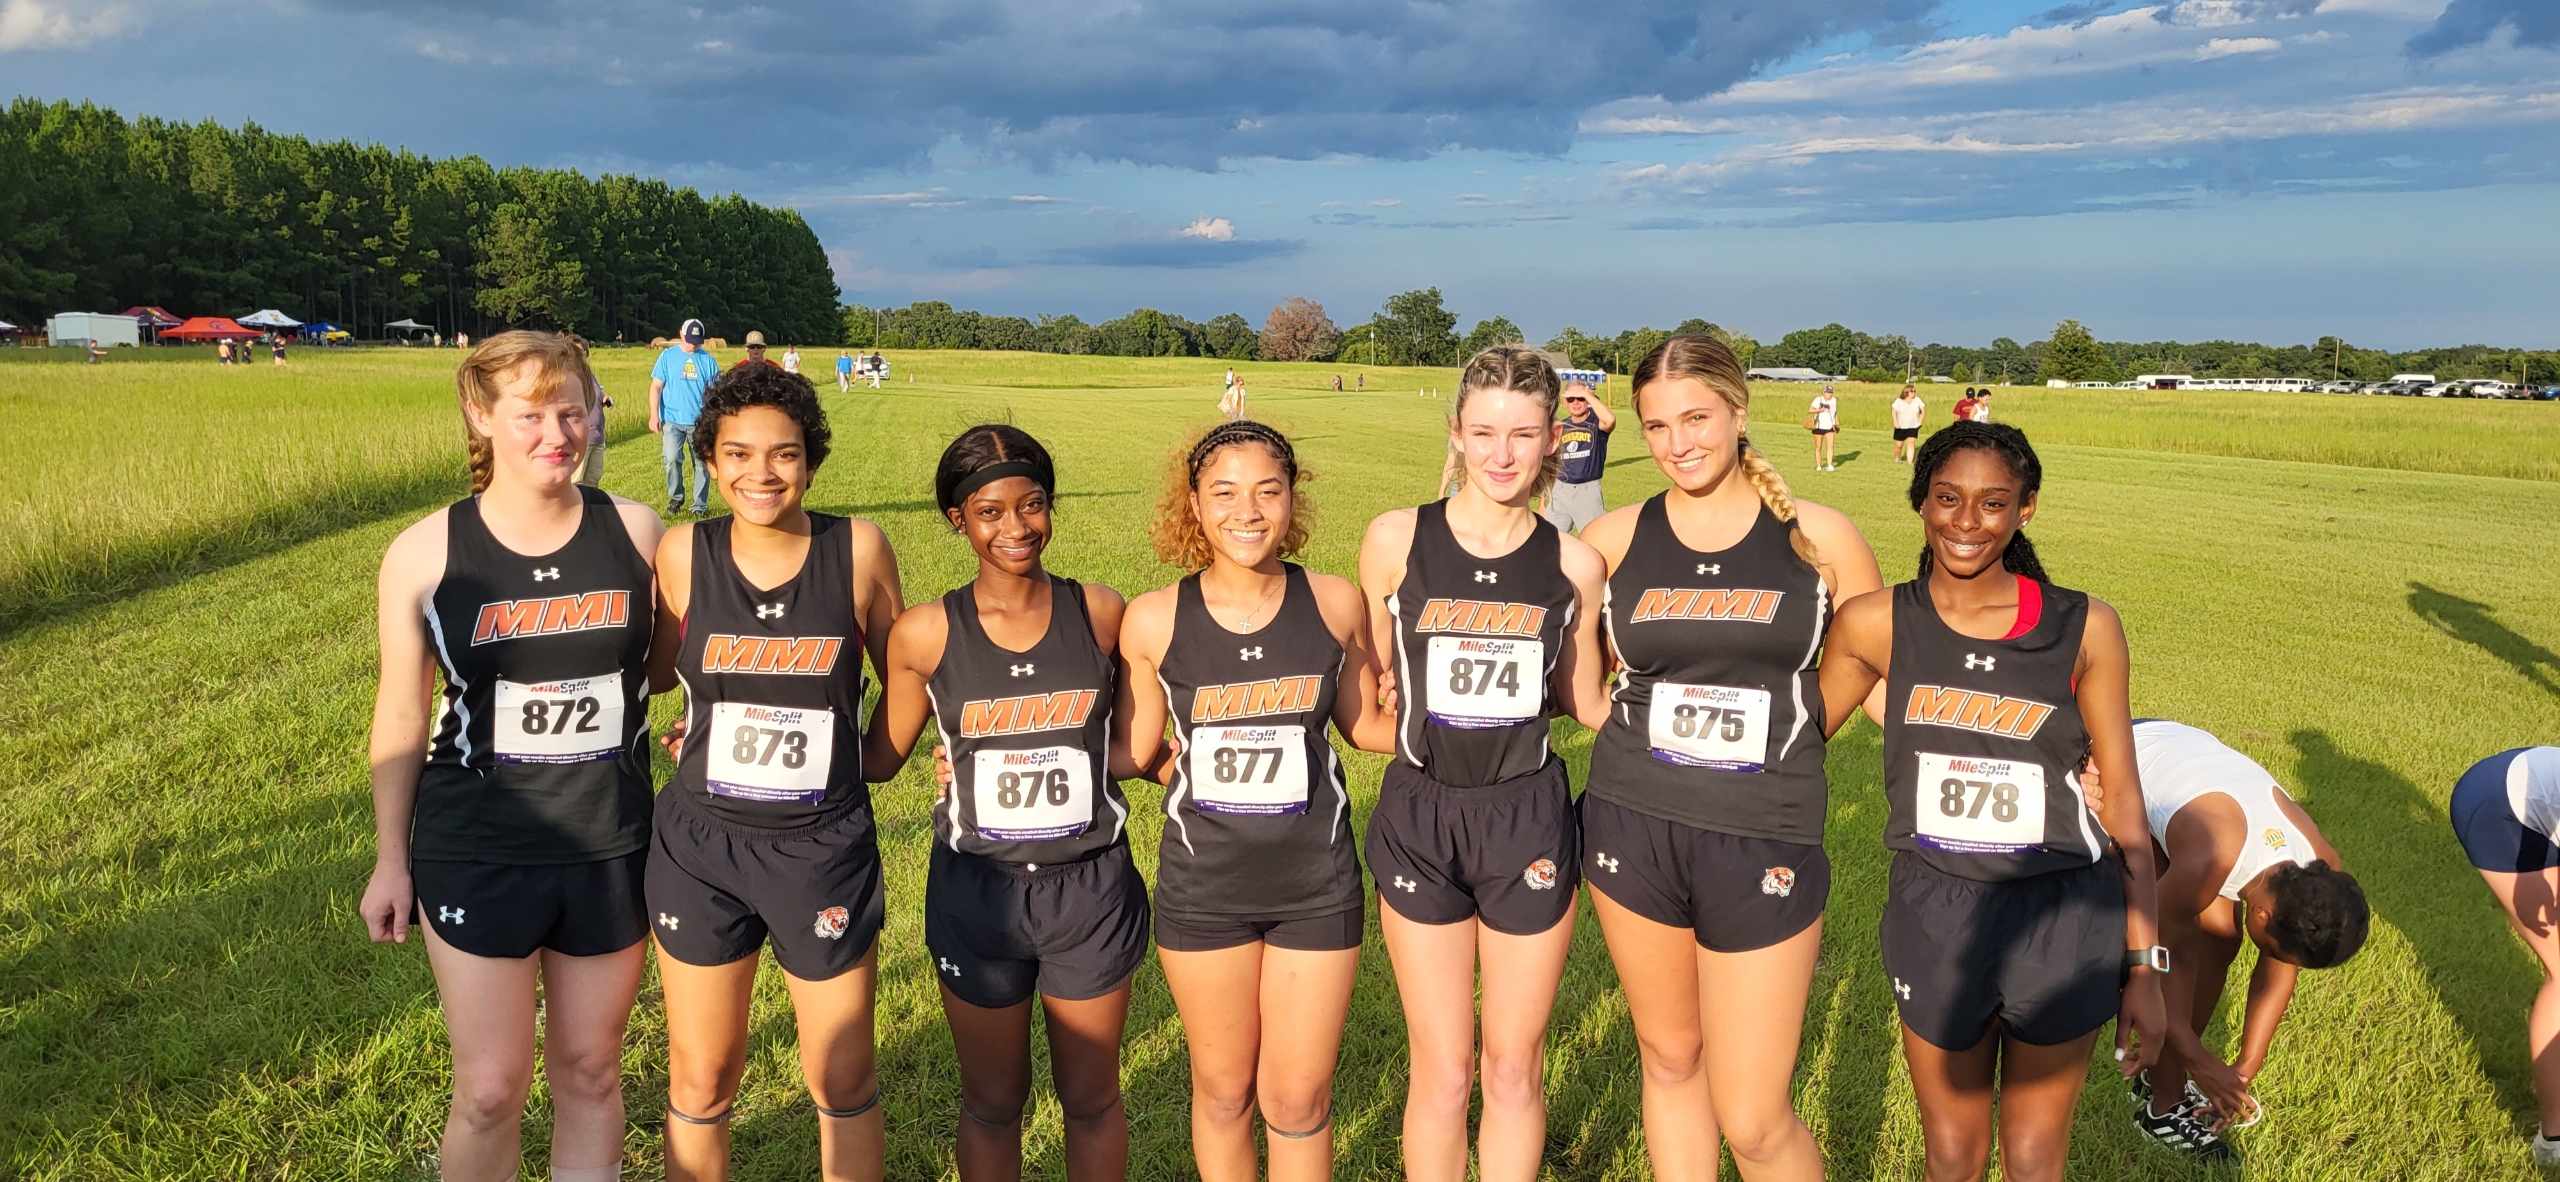 Steadman Paces Lady Tigers to 5th Place at GMC